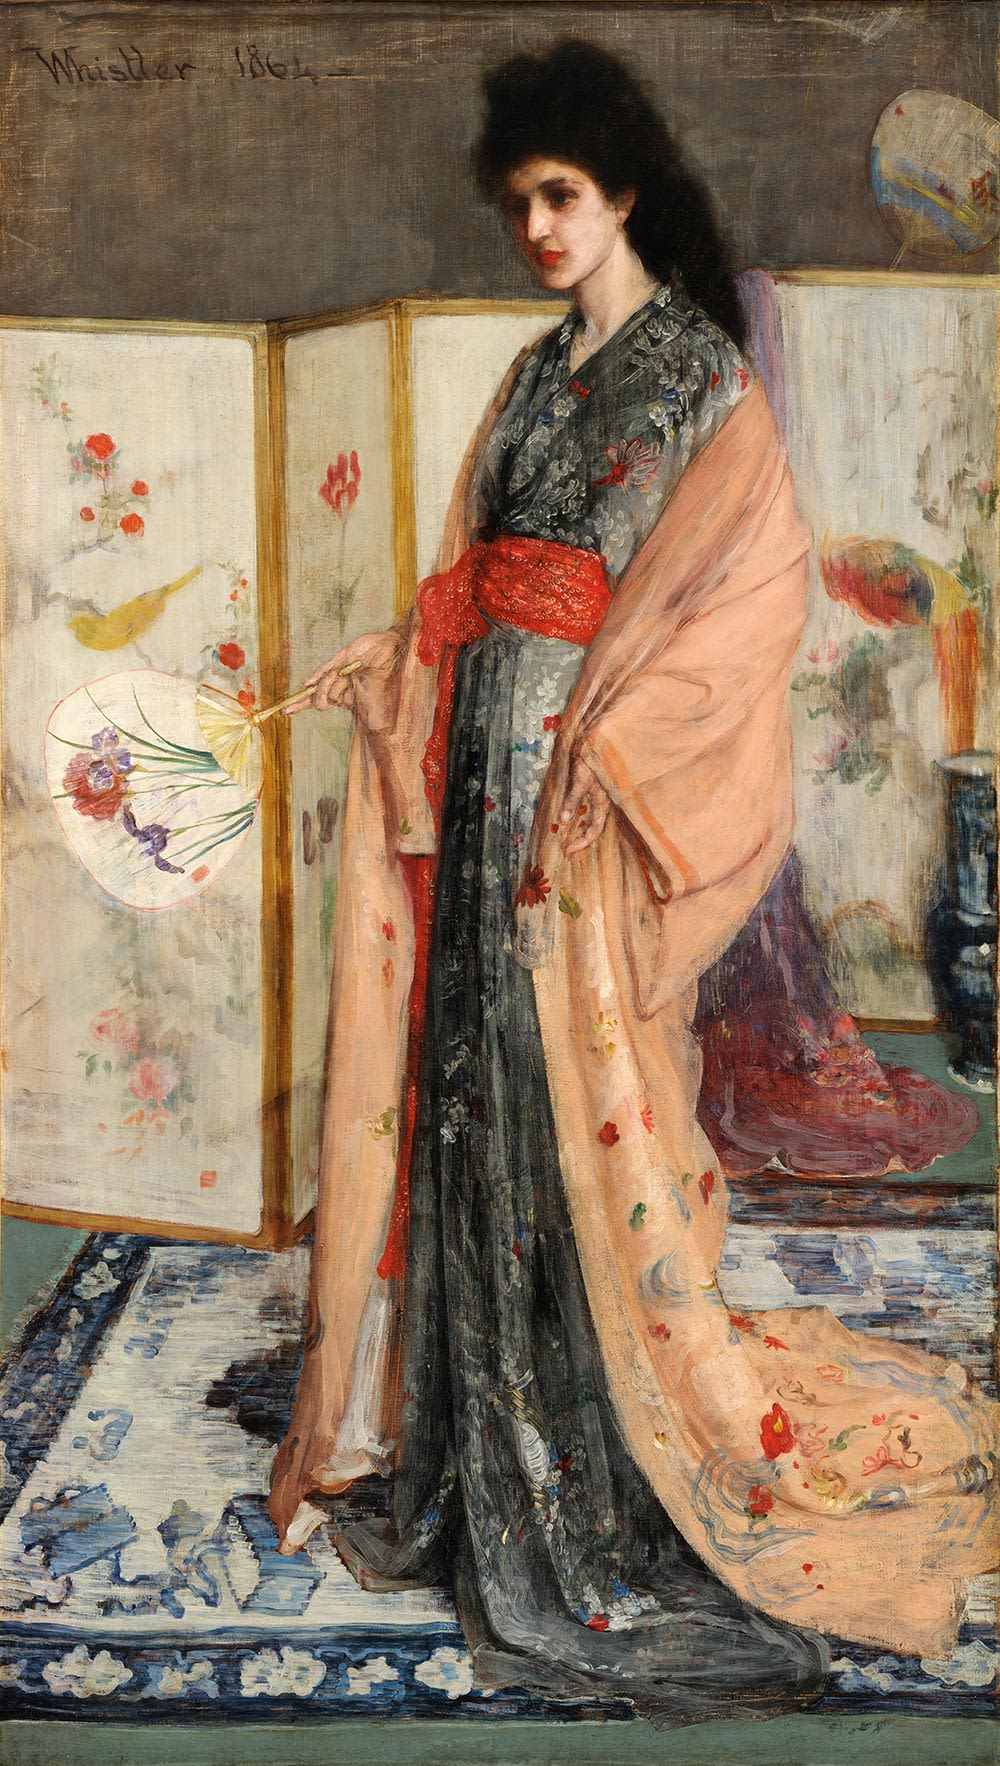 painting of a woman in a kimono, holding a fan